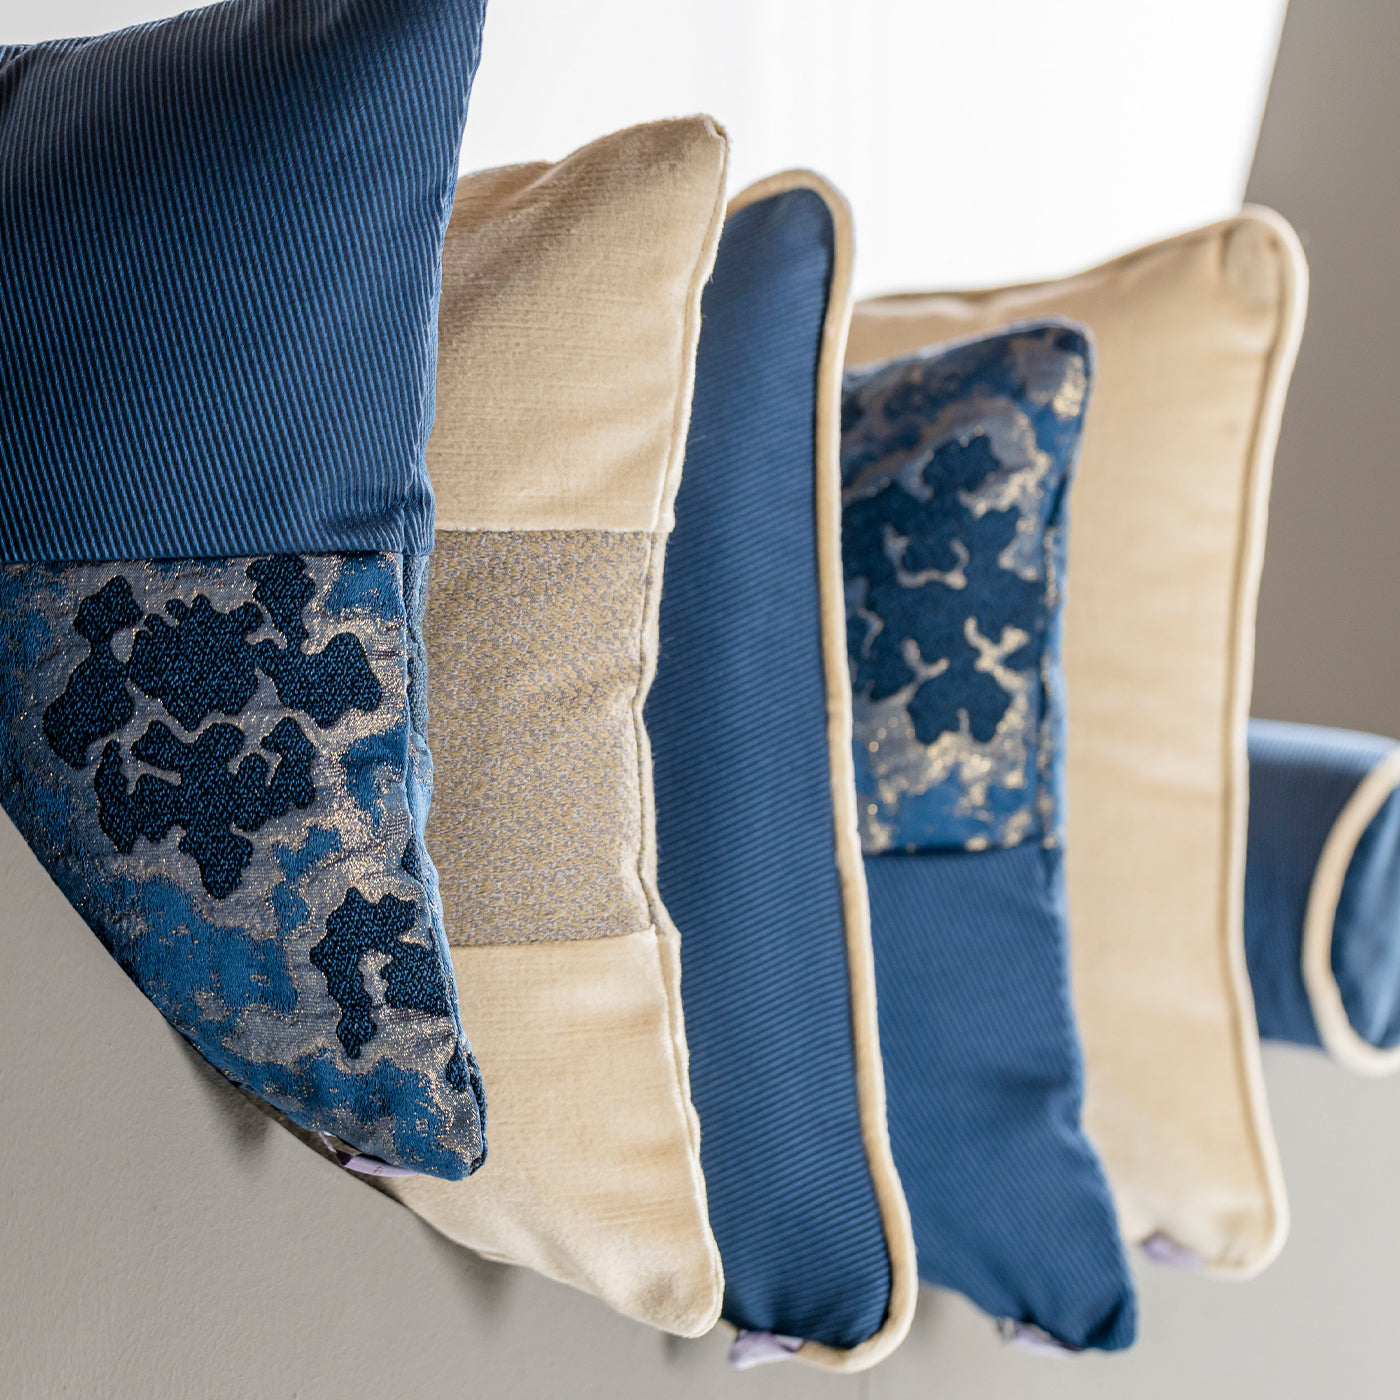 Decorative Blue and Gold Square Cushion - Alternative view 4